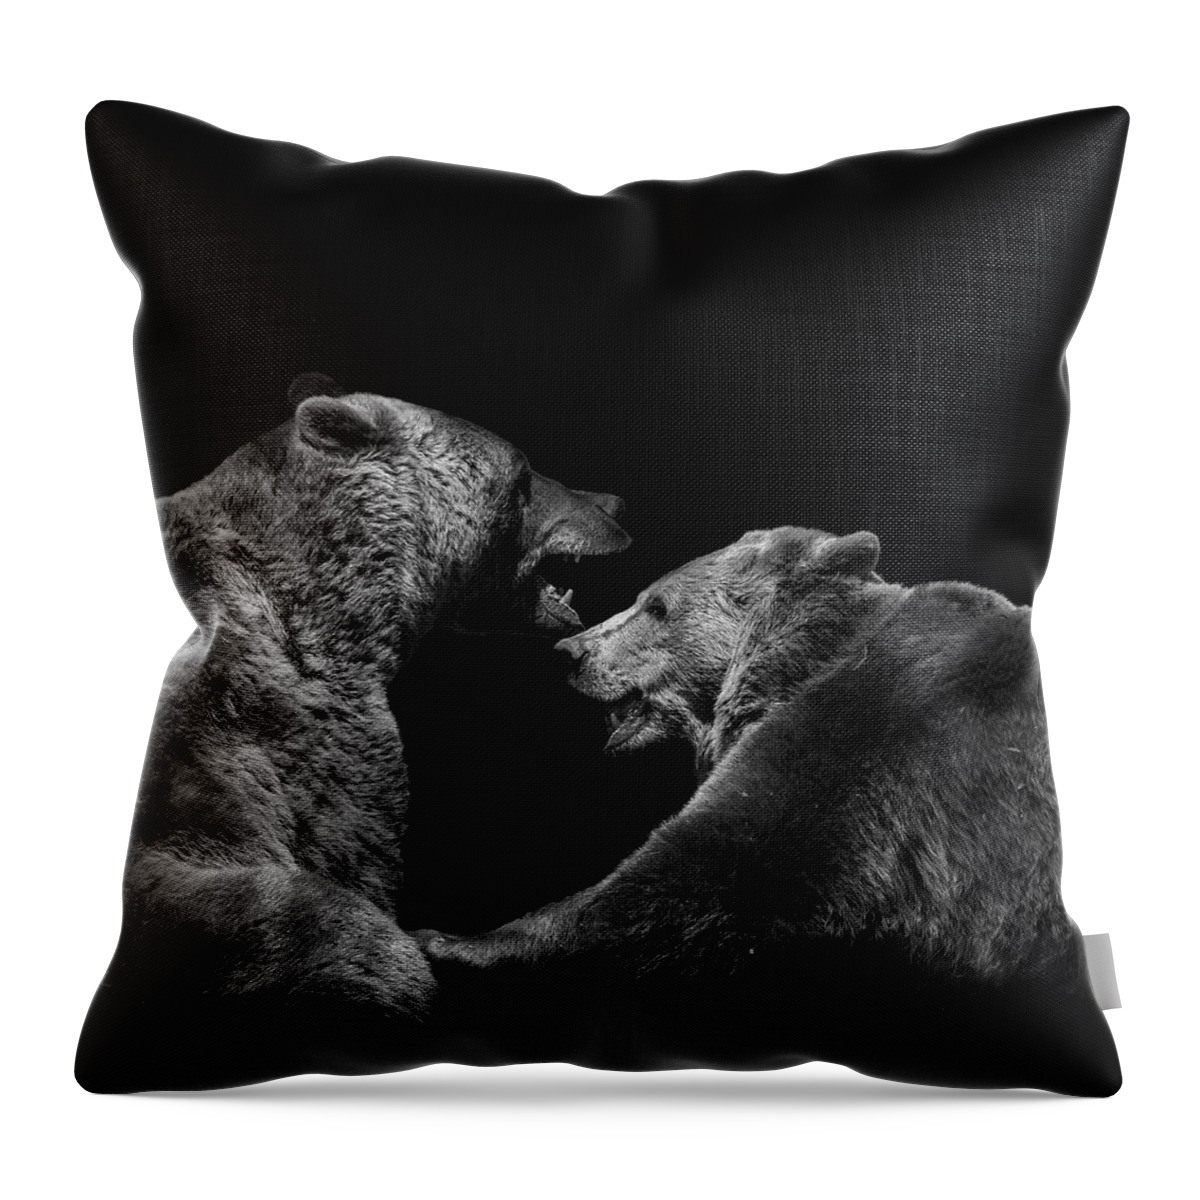 Bear Throw Pillow featuring the photograph Two Bears in black and white by Lukas Holas